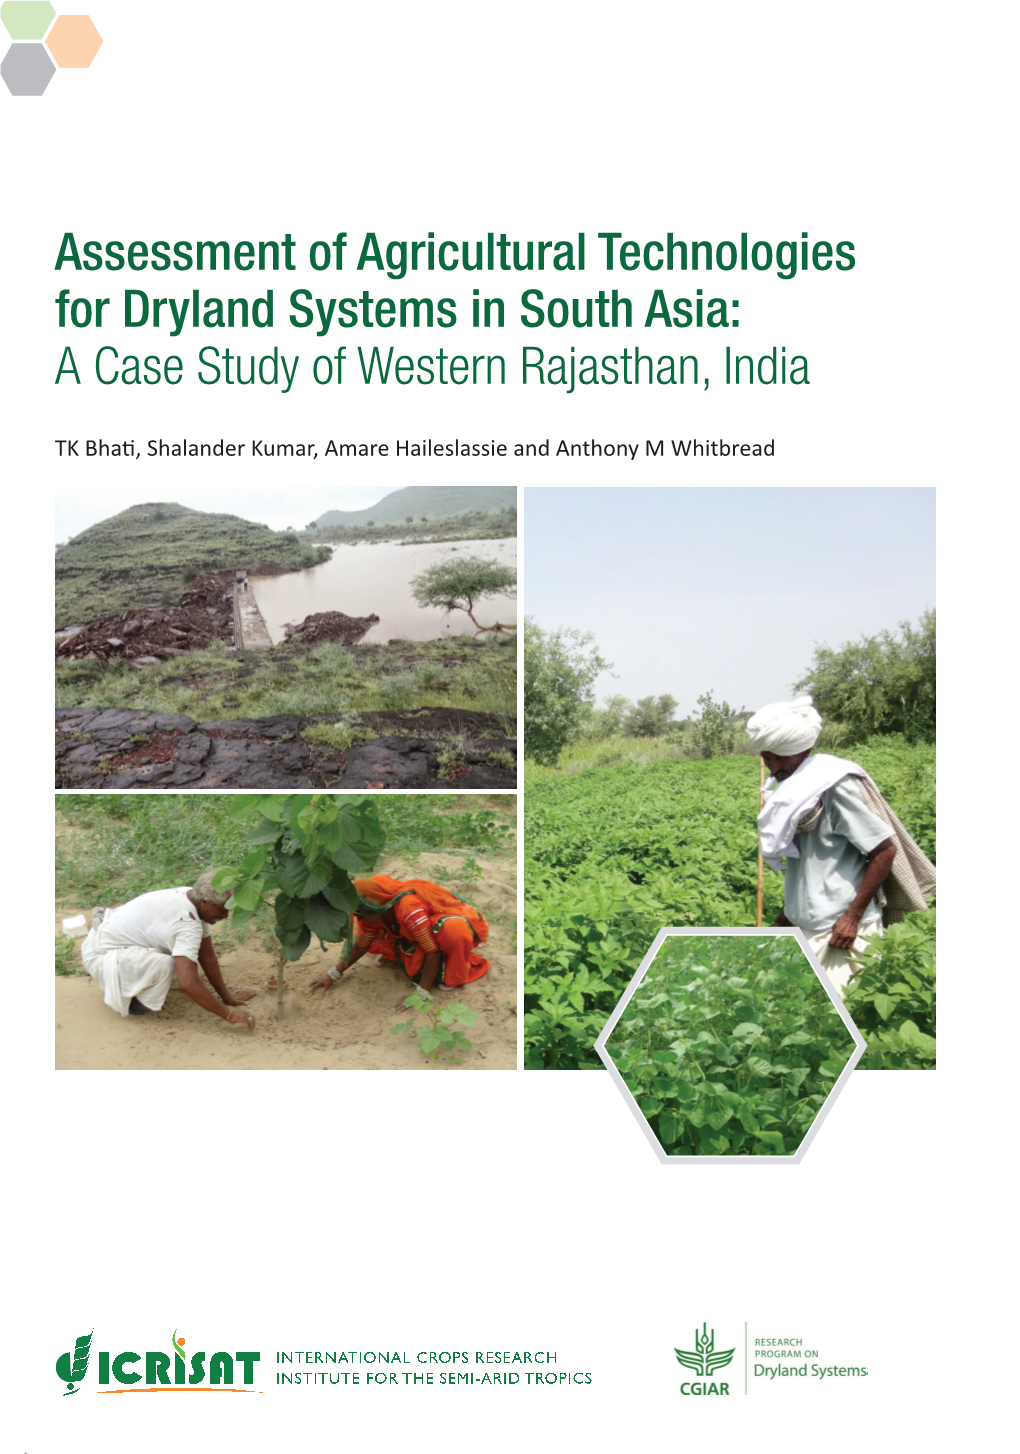 Assessment of Agricultural Technologies for Dryland Systems in South Asia: a Case Study of Western Rajasthan, India